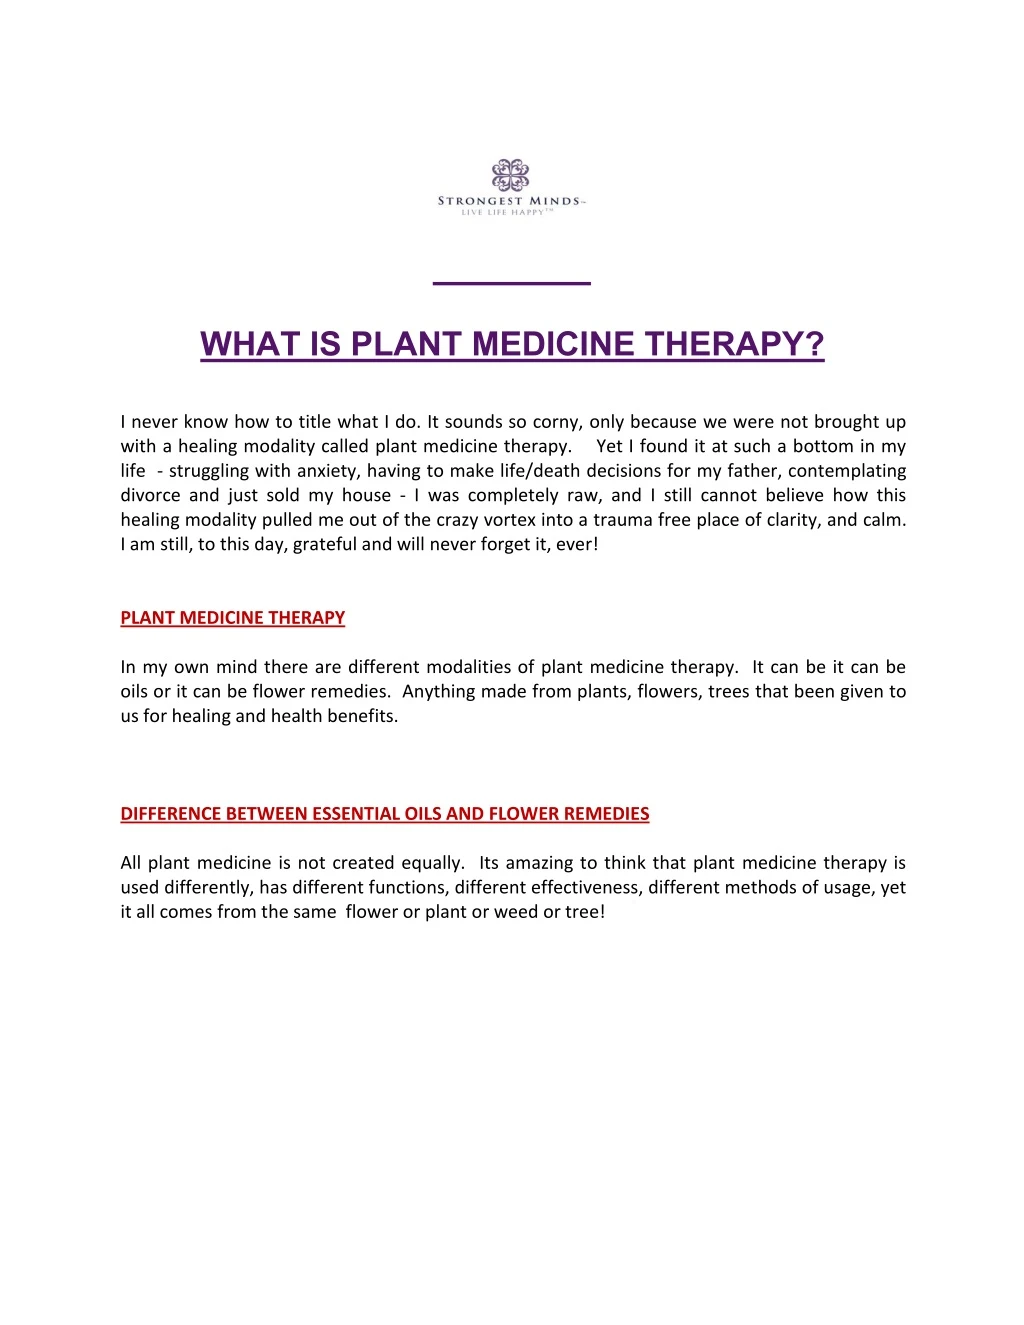 what is plant medicine therapy